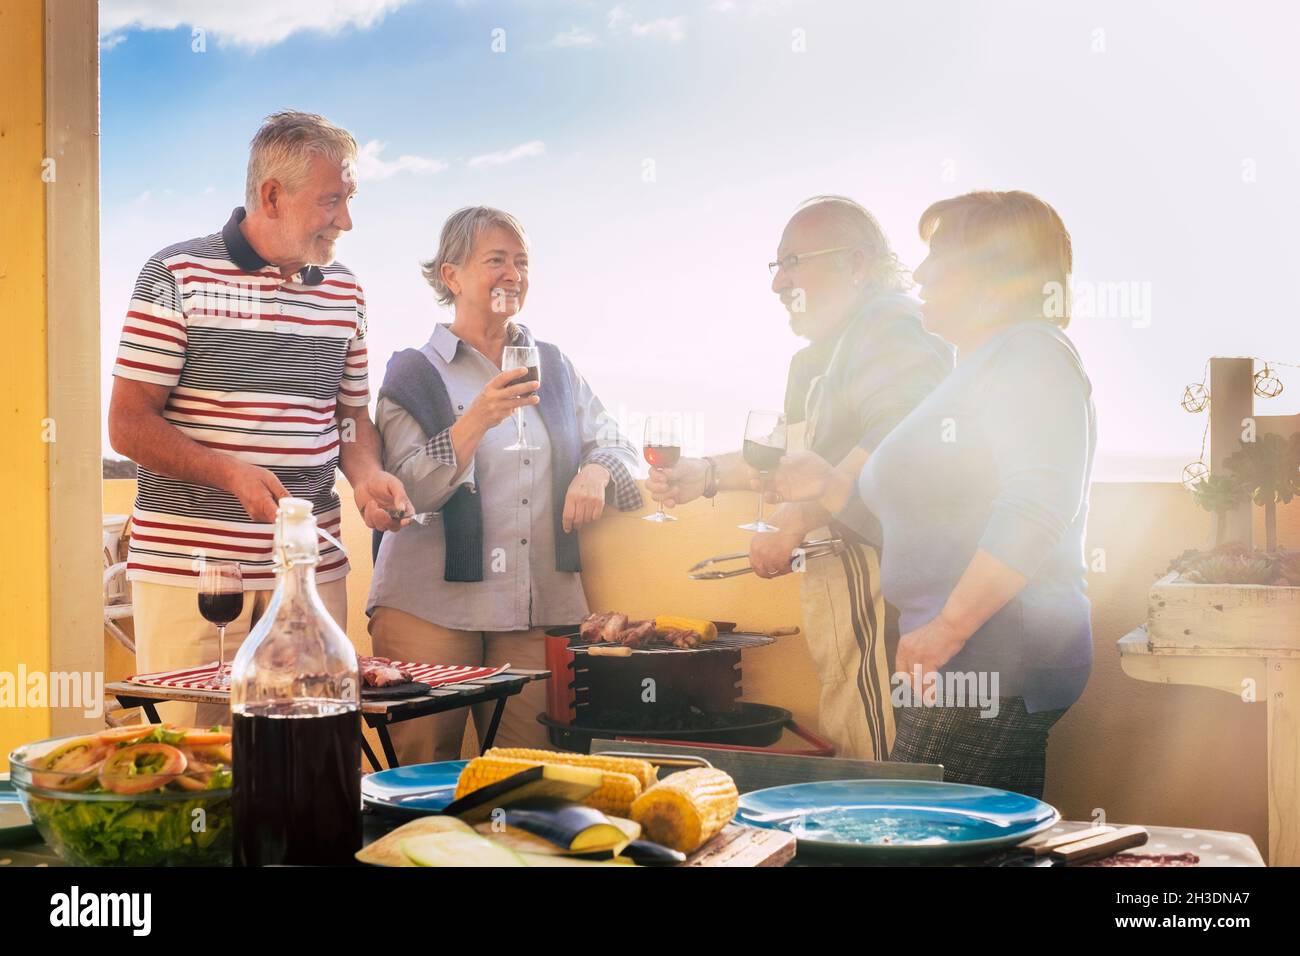 Group of elderly people have fun in frienship outdoor cooking a bbq all together. Senior couples friends enjoy leisure time eating and drinking and ce Stock Photo